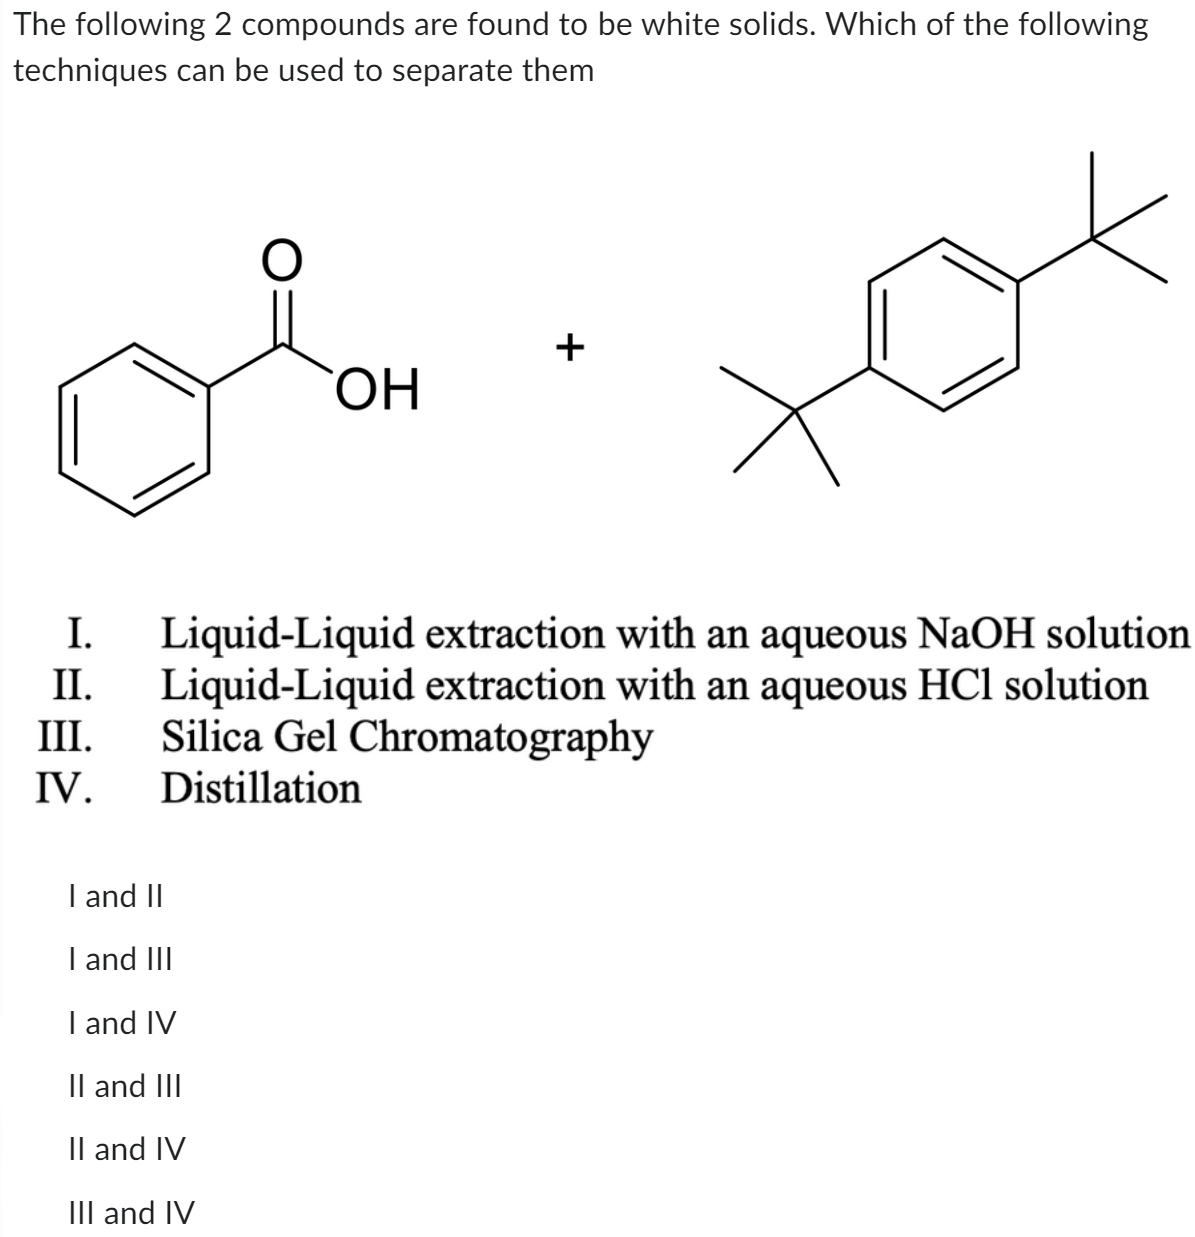 The following 2 compounds are found to be white solids. Which of the following
techniques can be used to separate them
OH
+
I. Liquid-Liquid extraction with an aqueous NaOH solution
Liquid-Liquid extraction with an aqueous HCl solution
Silica Gel Chromatography
Distillation
II.
III.
IV.
I and II
I and III
I and IV
II and III
II and IV
III and IV